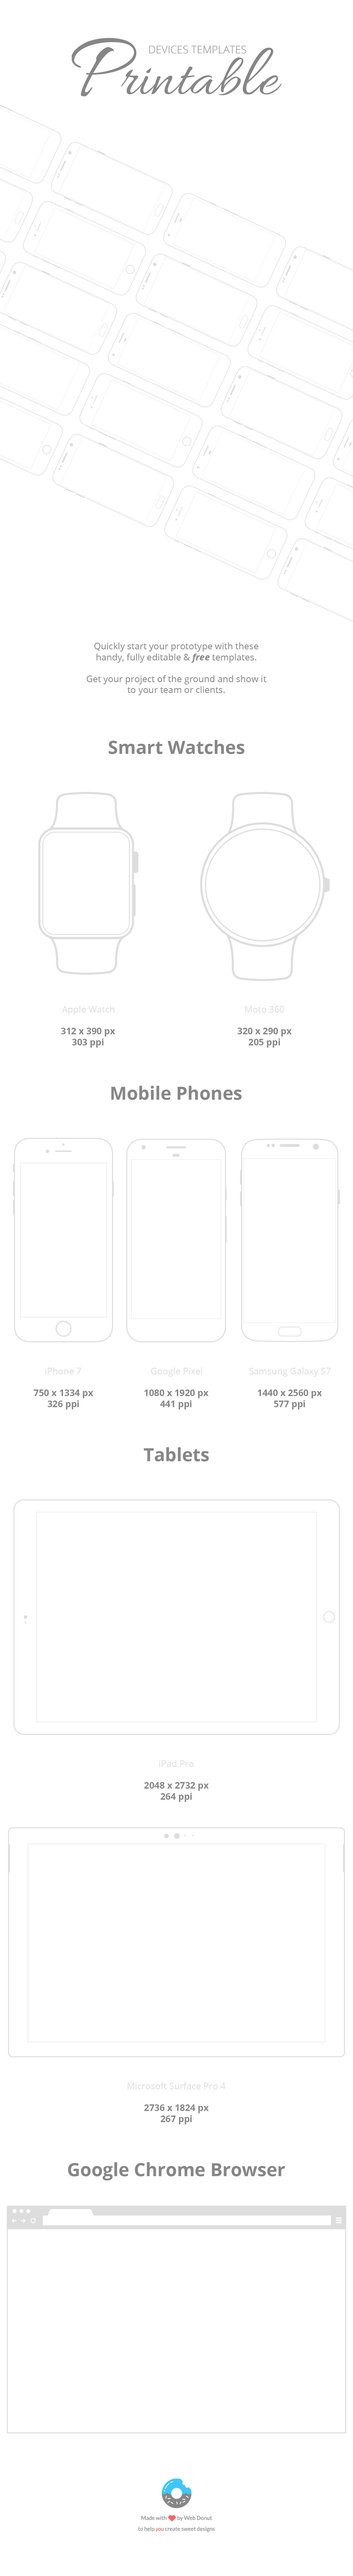 Printable Devices Templates